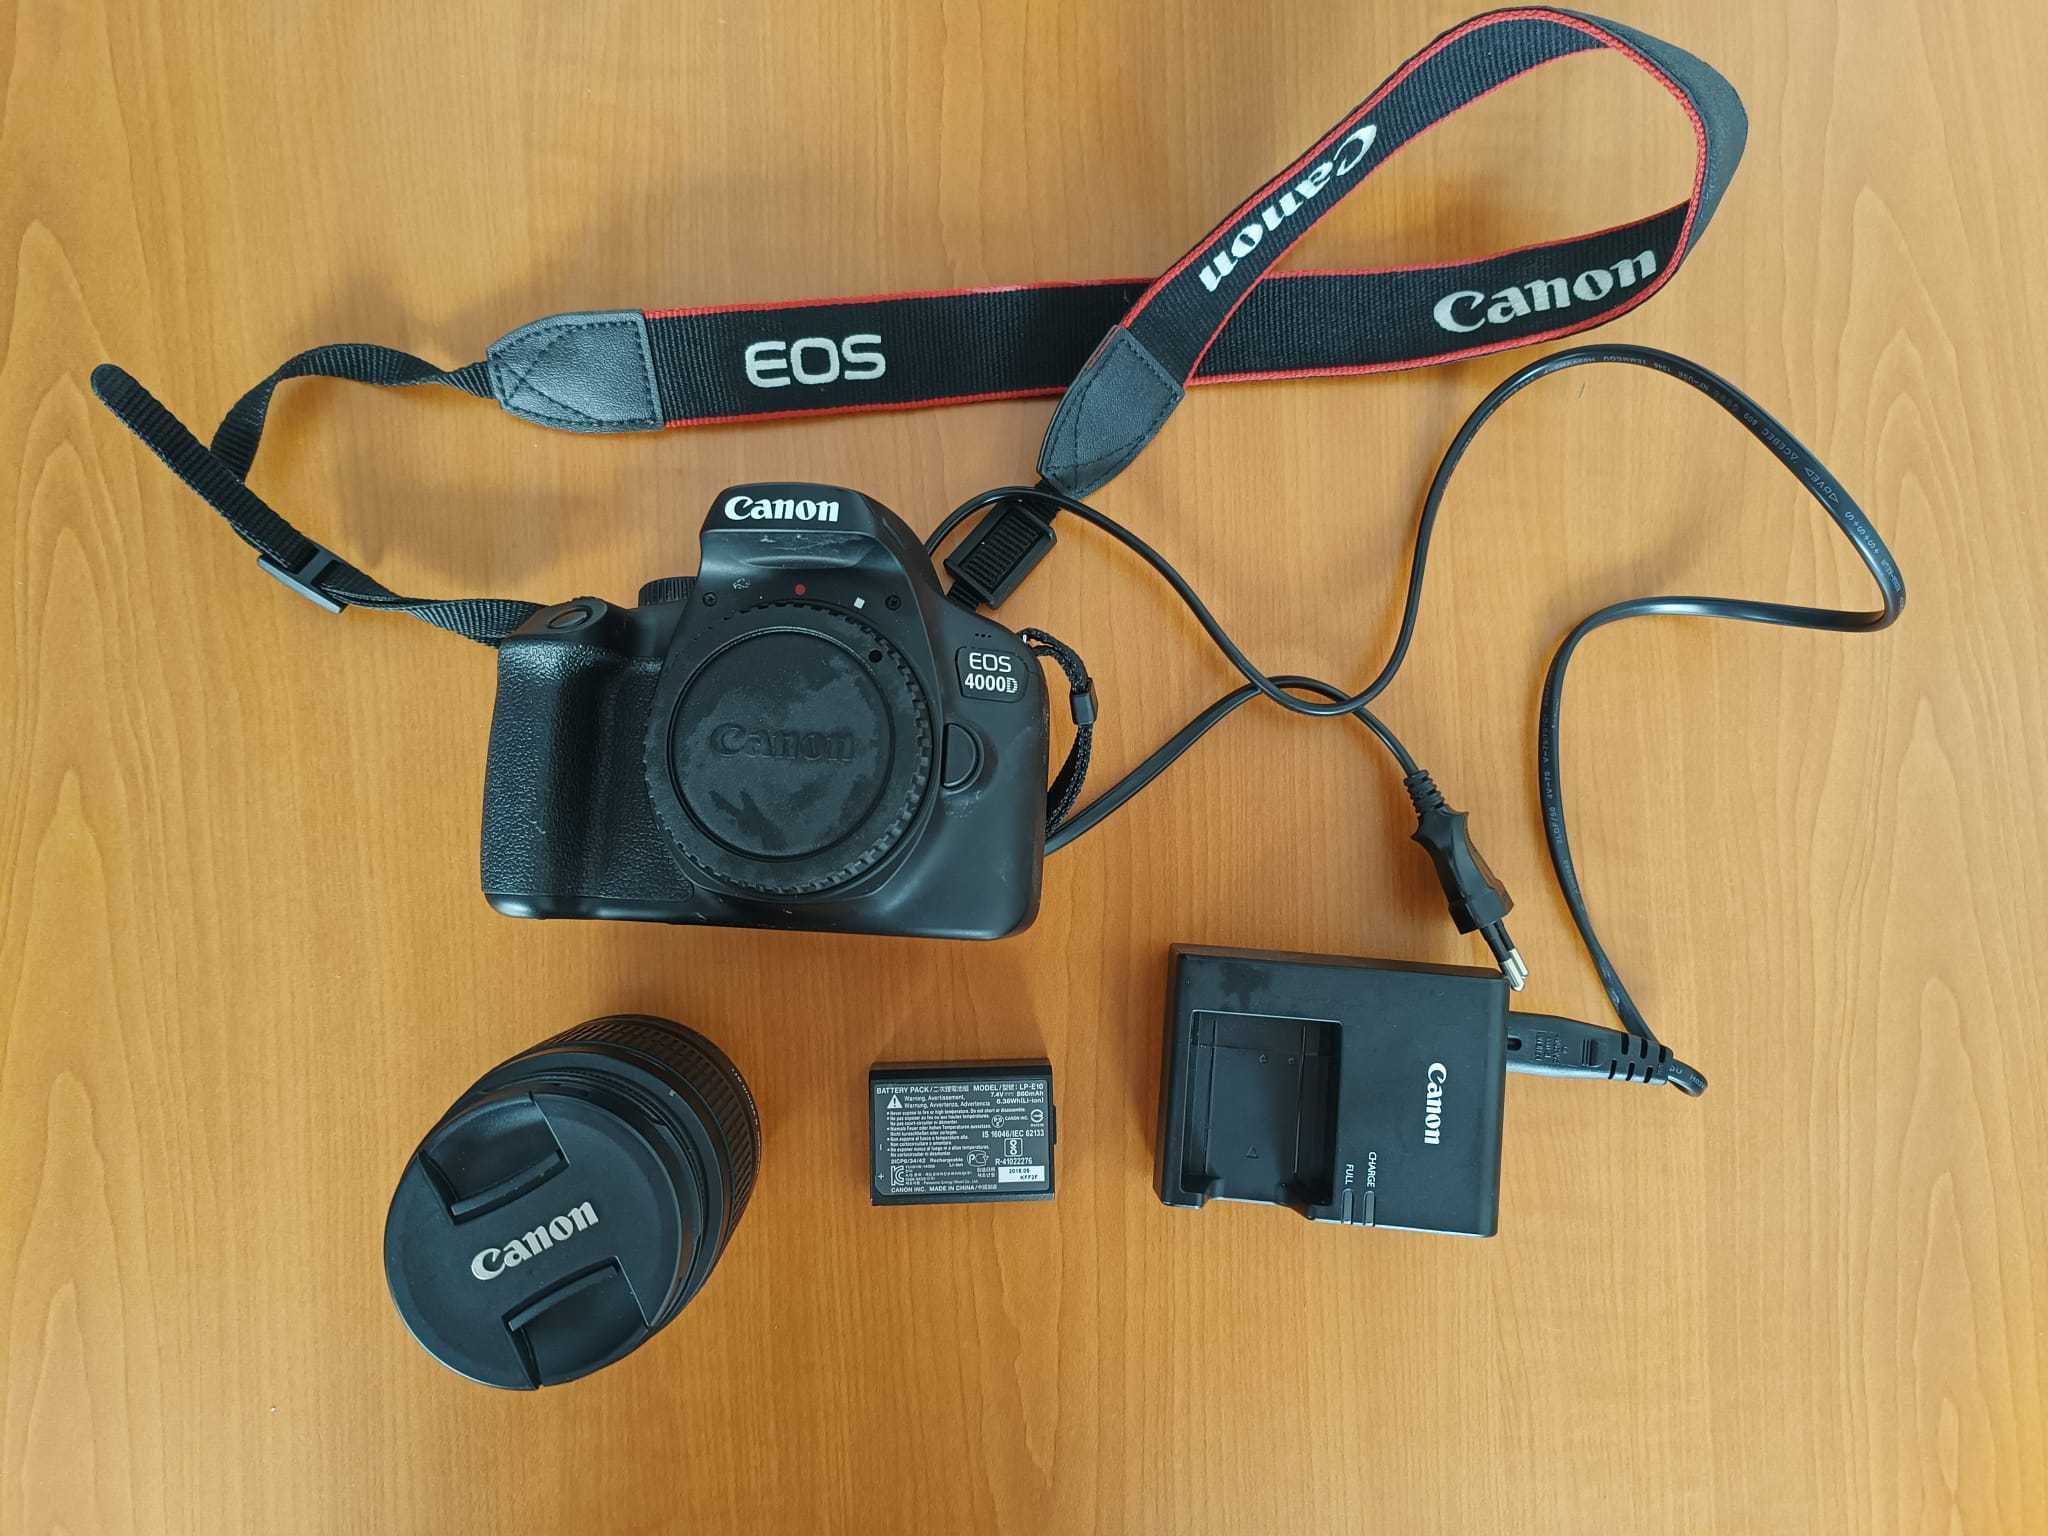 Canon EOS 4000D Kit EF-S 18- 55mm f/3.5-5.6 III